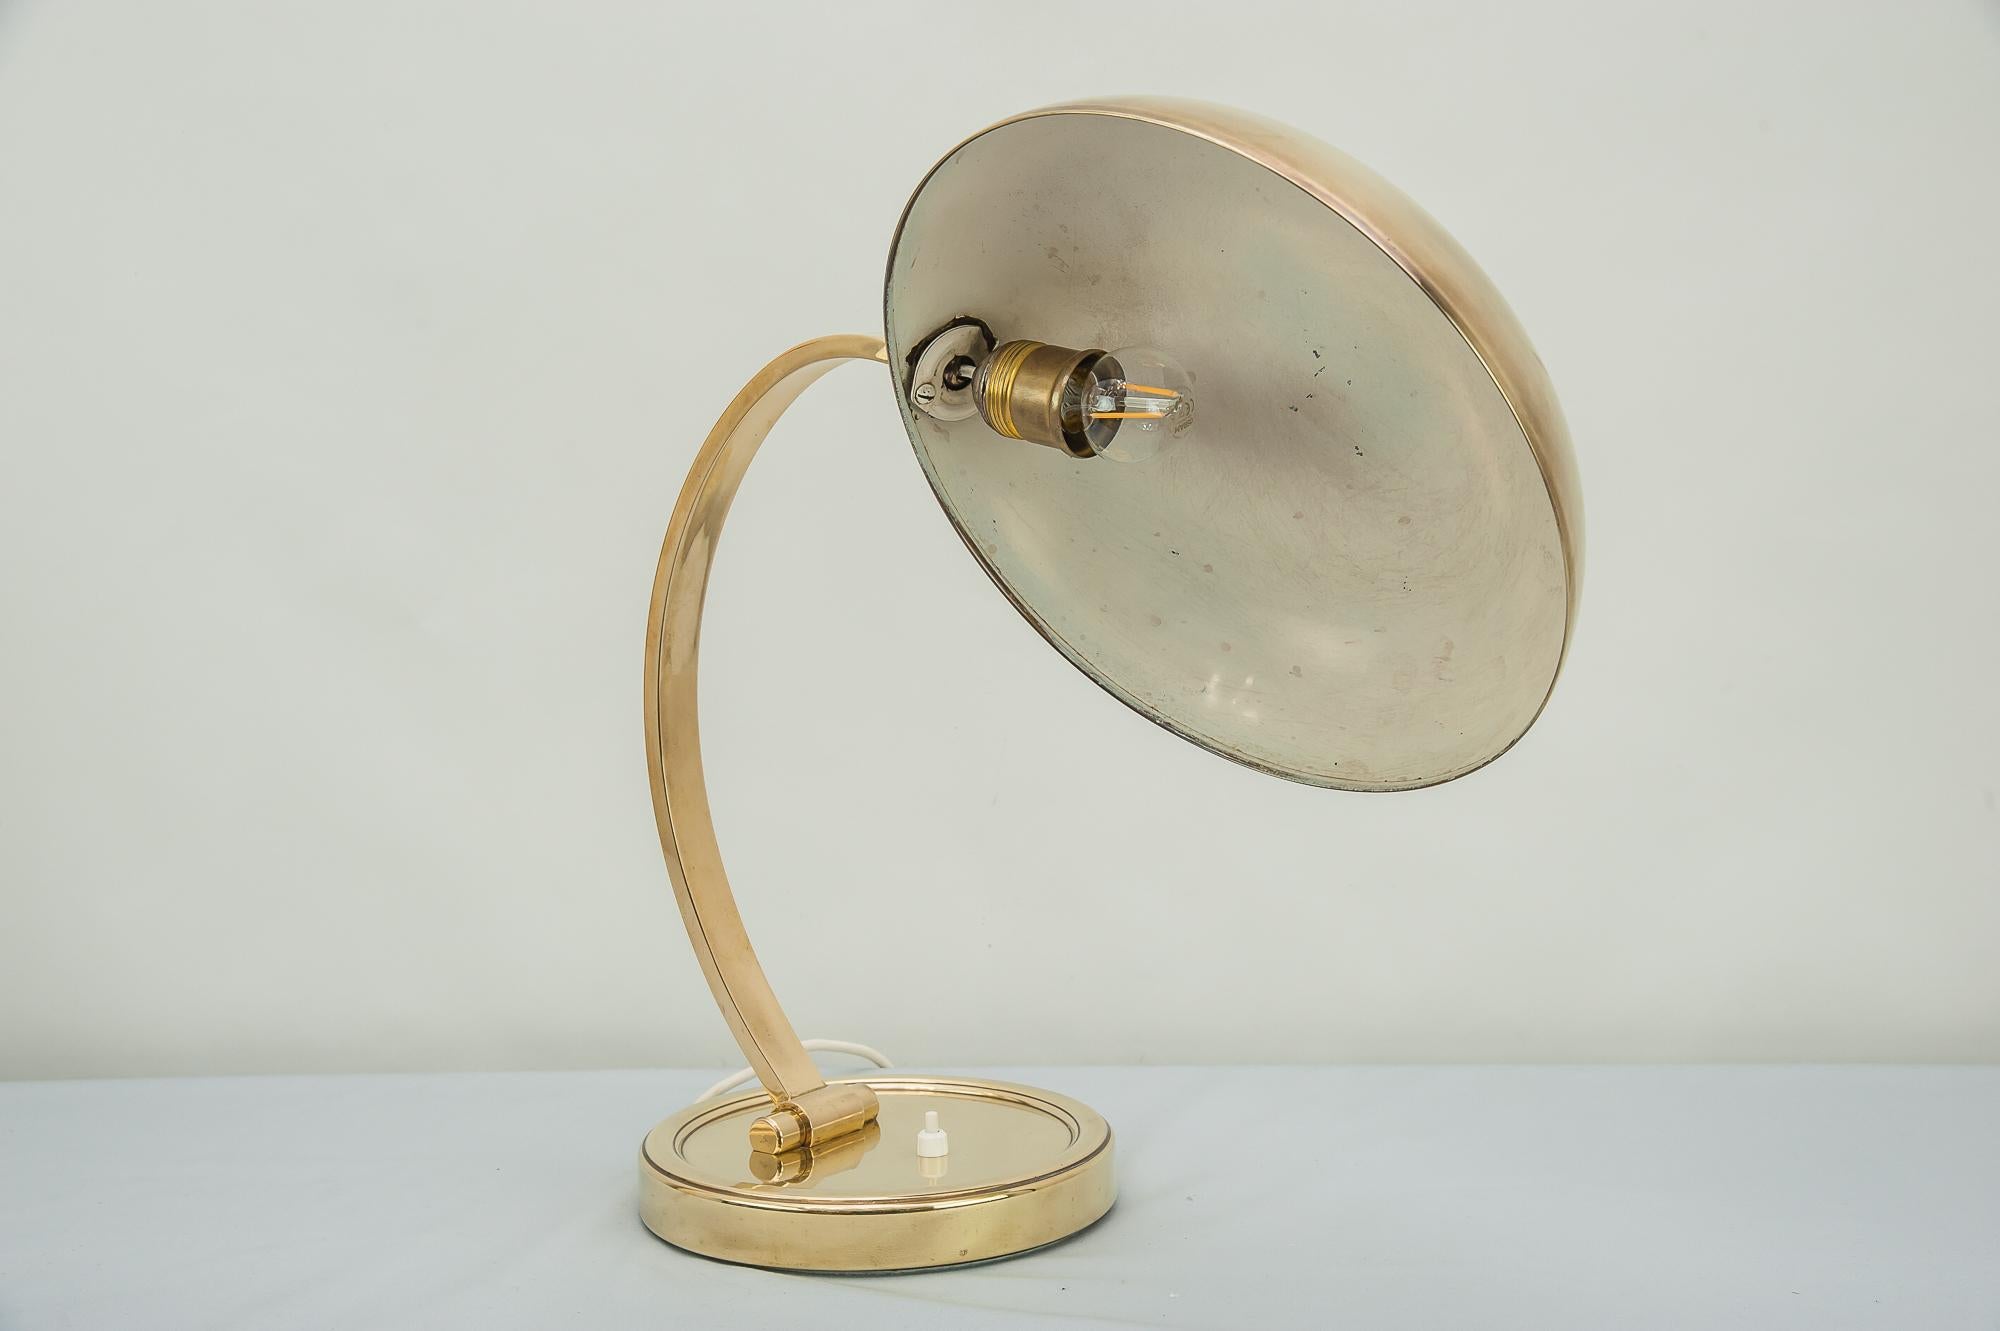 Christian Dell, Kaiser table lamp
A brass table lamp designed by Christian Dell and produced by Kaiser Leuchten & Co, Germany.

Original condition.